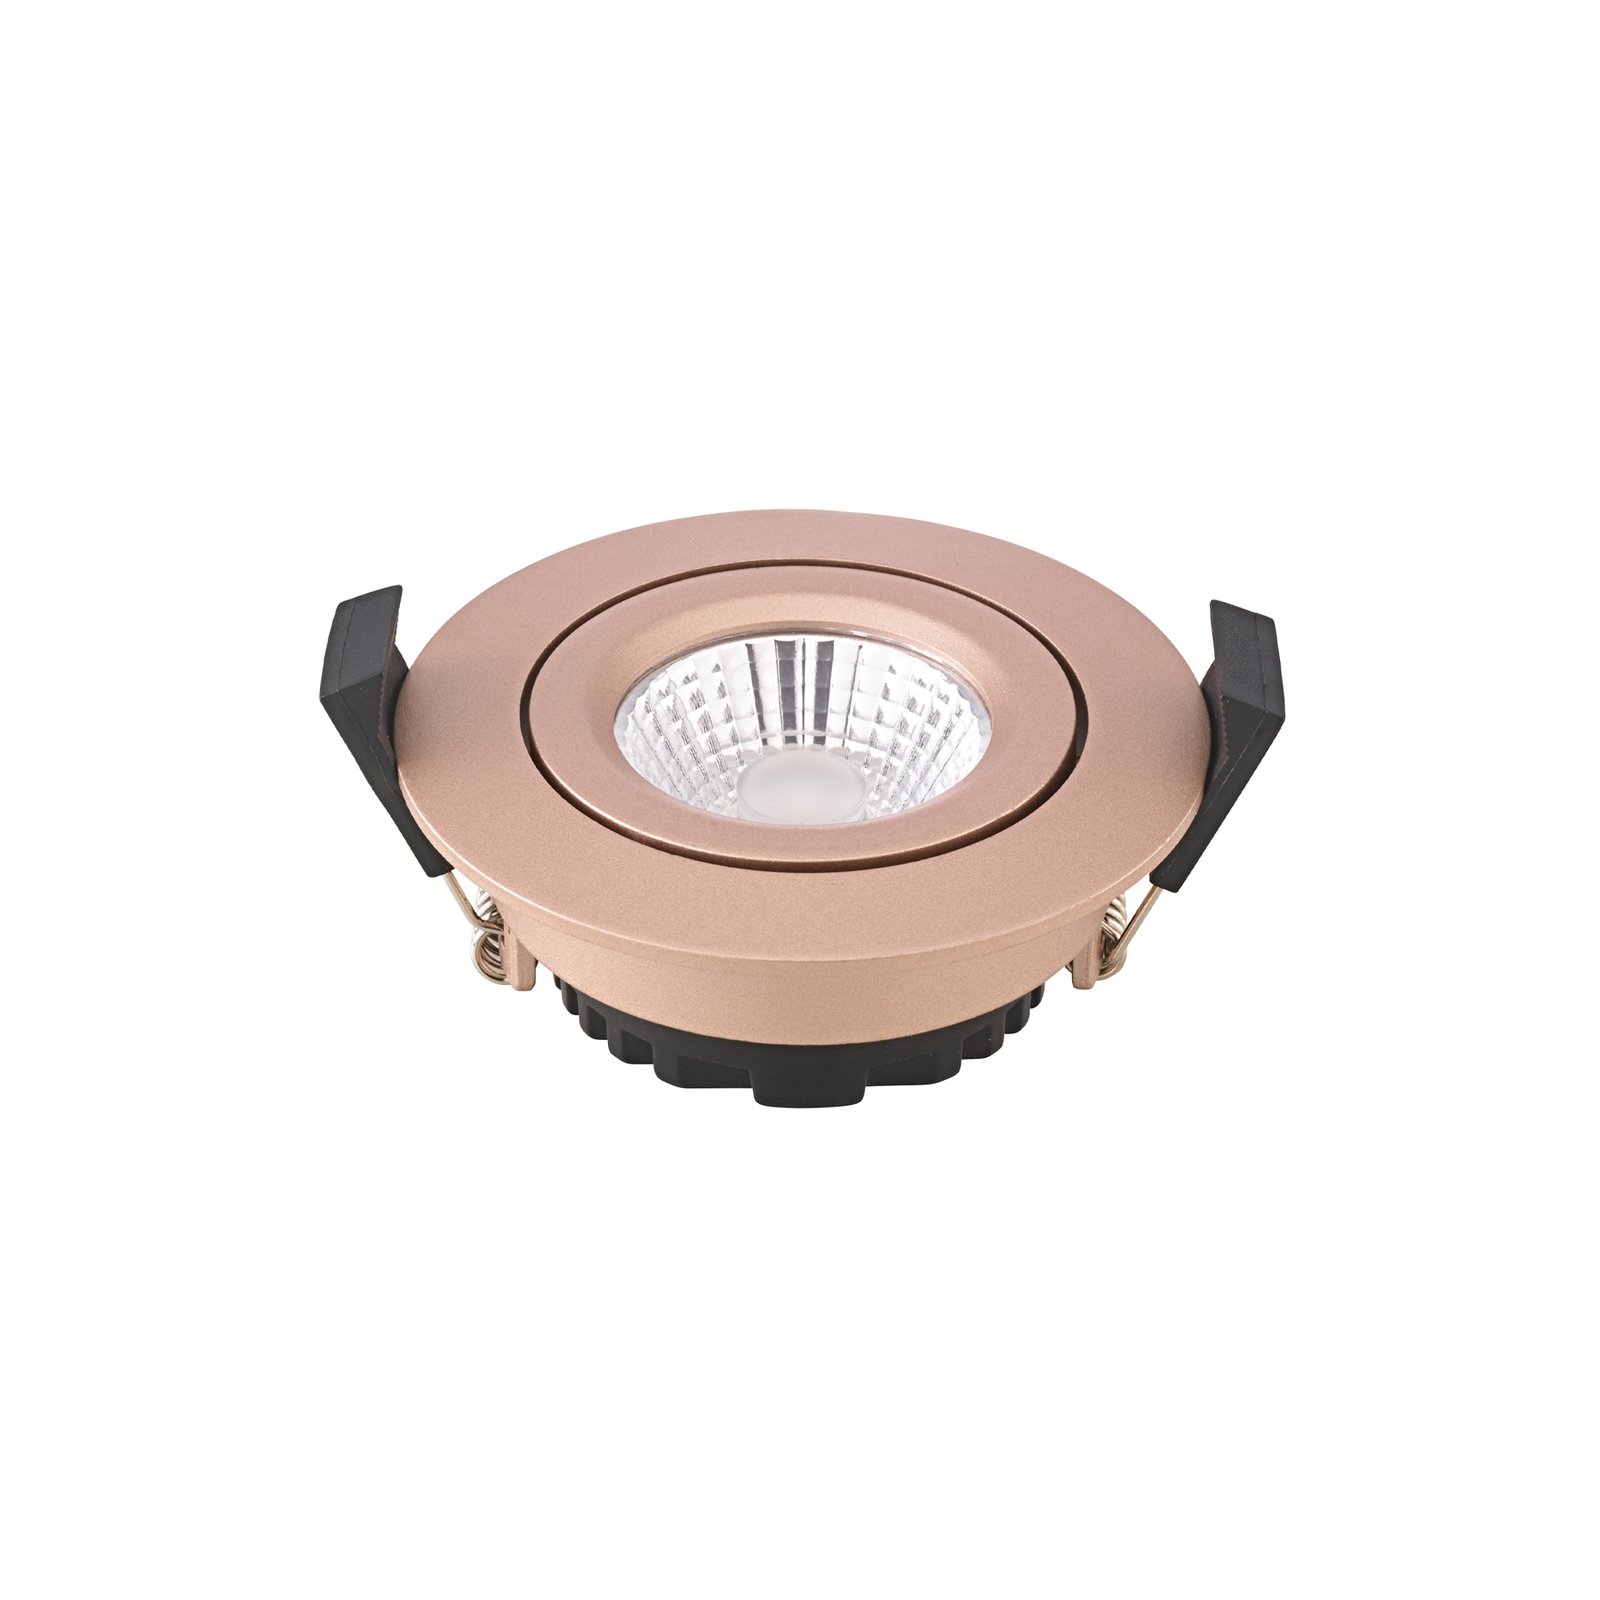 Diled LED recessed ceiling spotlight, Ø 8.5 cm, 6 W, dimmable, rosé